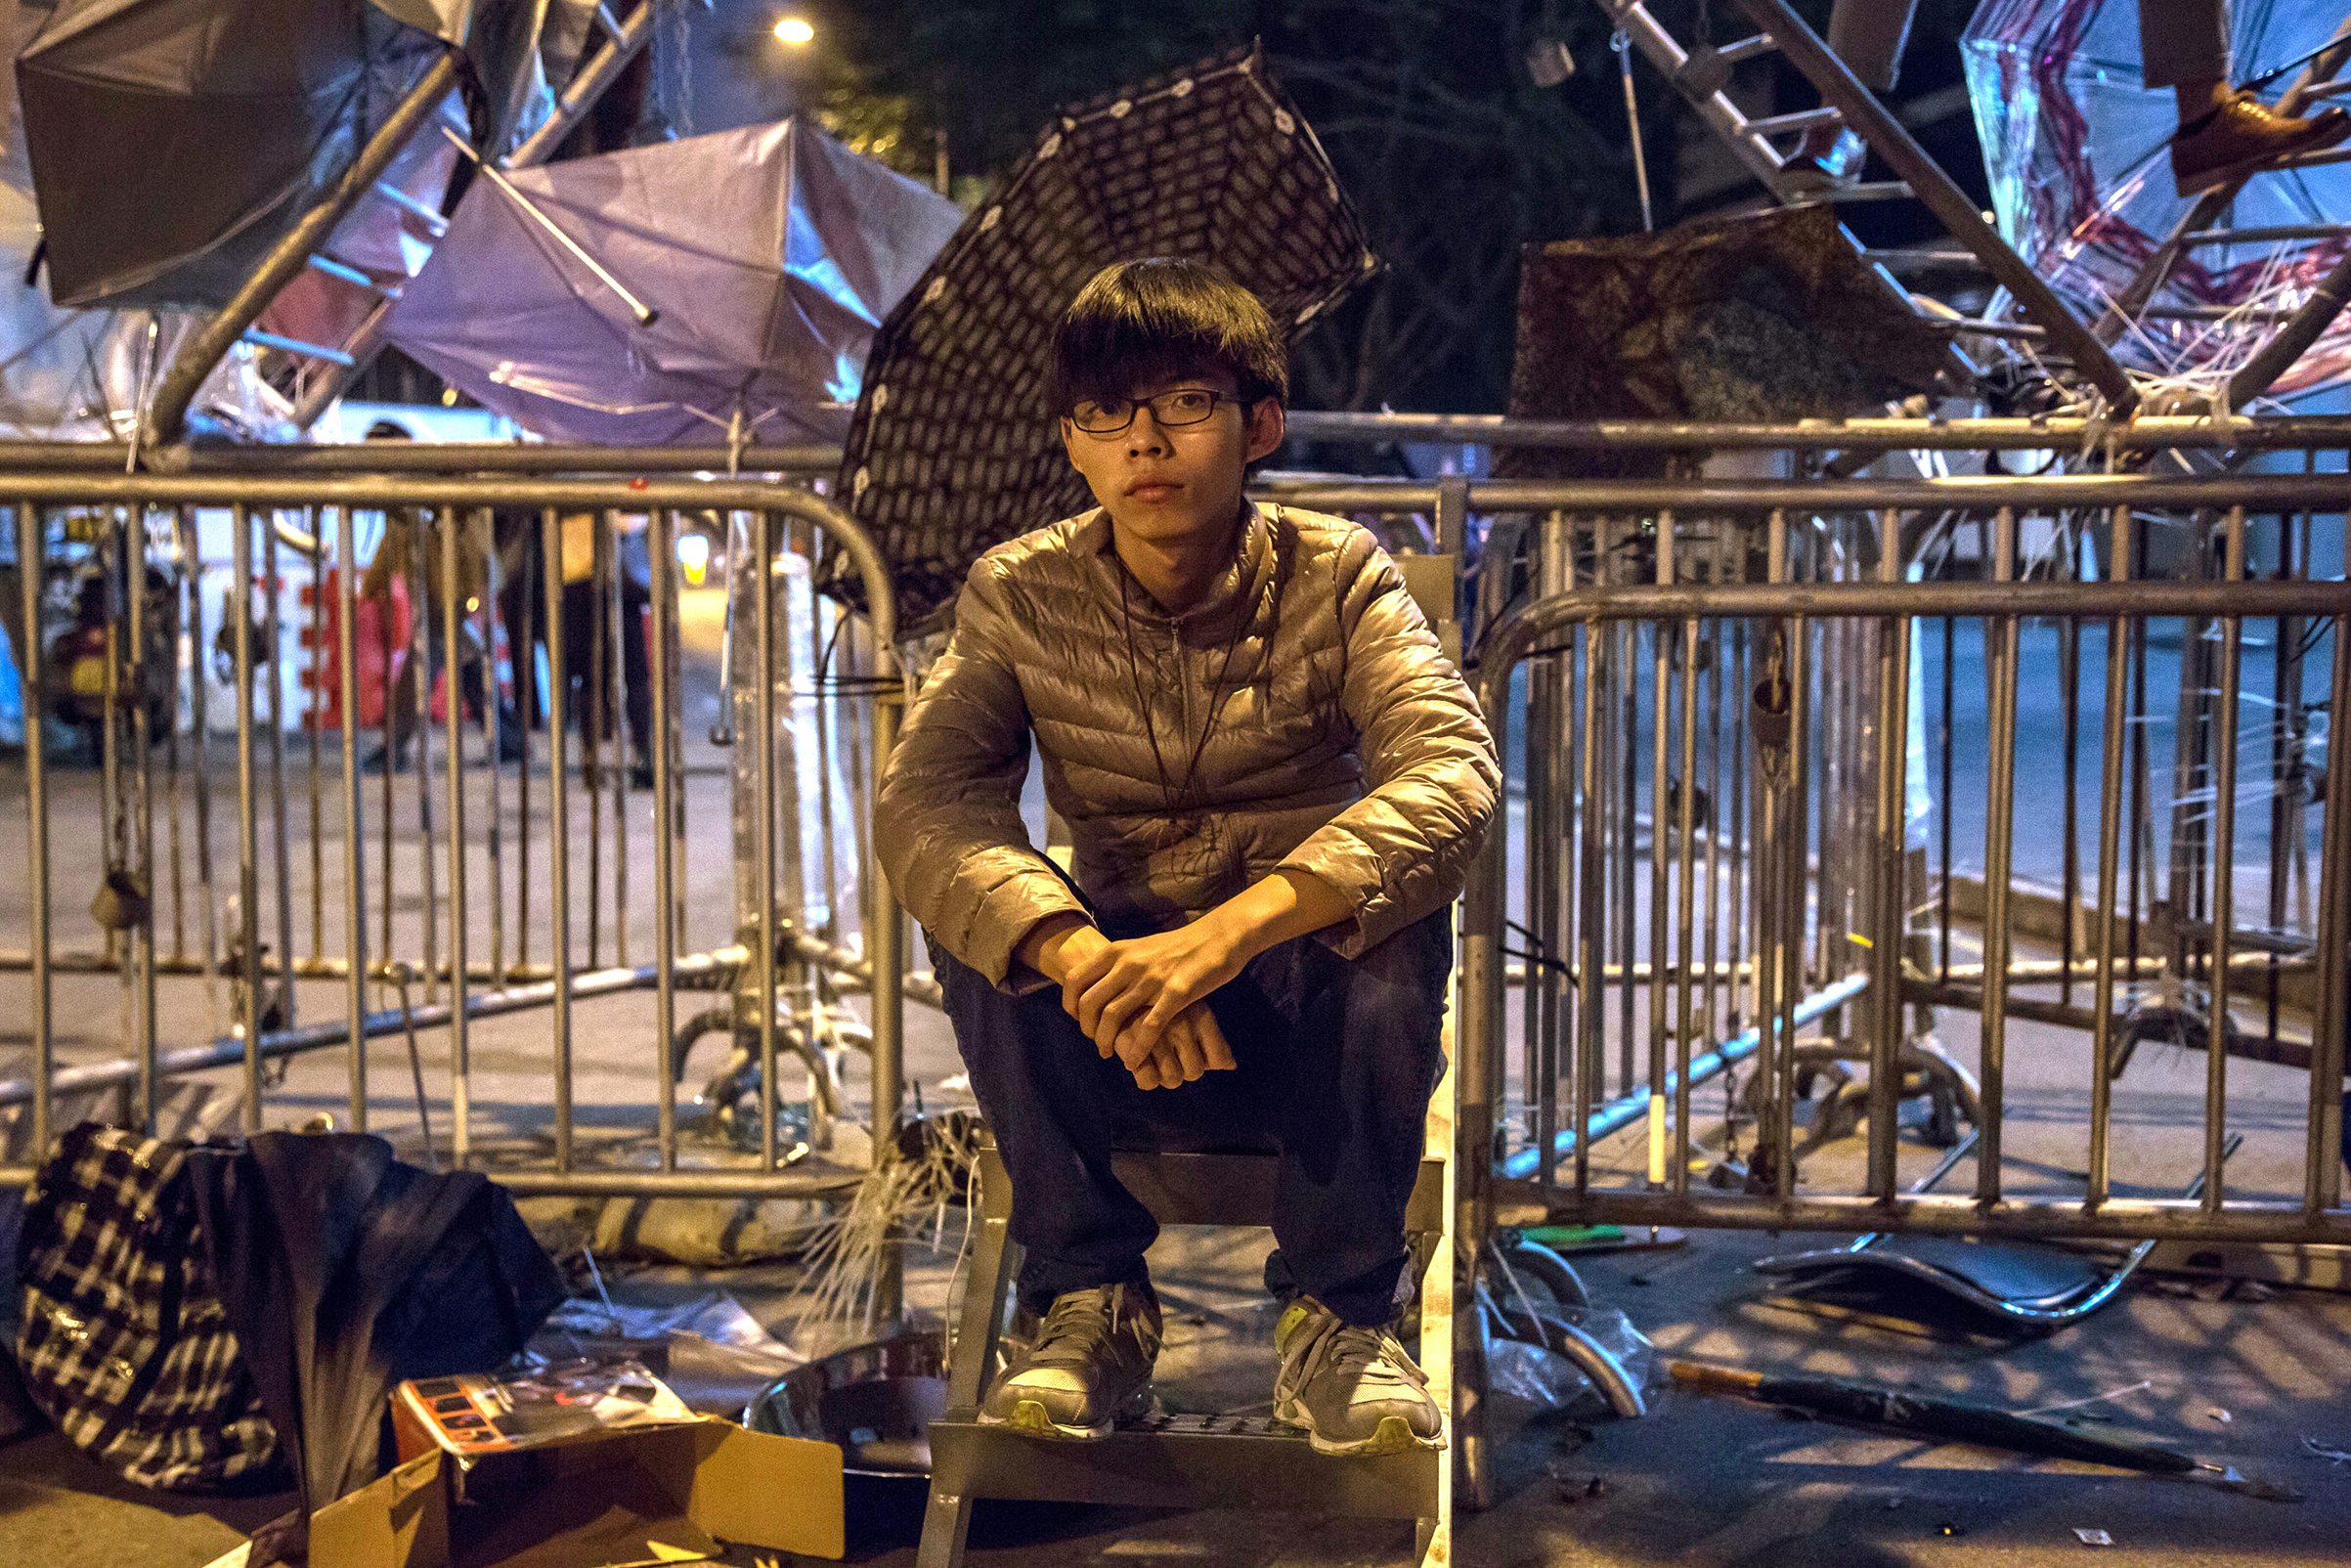 Wong helped kick-start the Umbrella Movement protests in 2014, when he was 17 years old (Lam Yik Fei—Bloomberg/Getty Images)